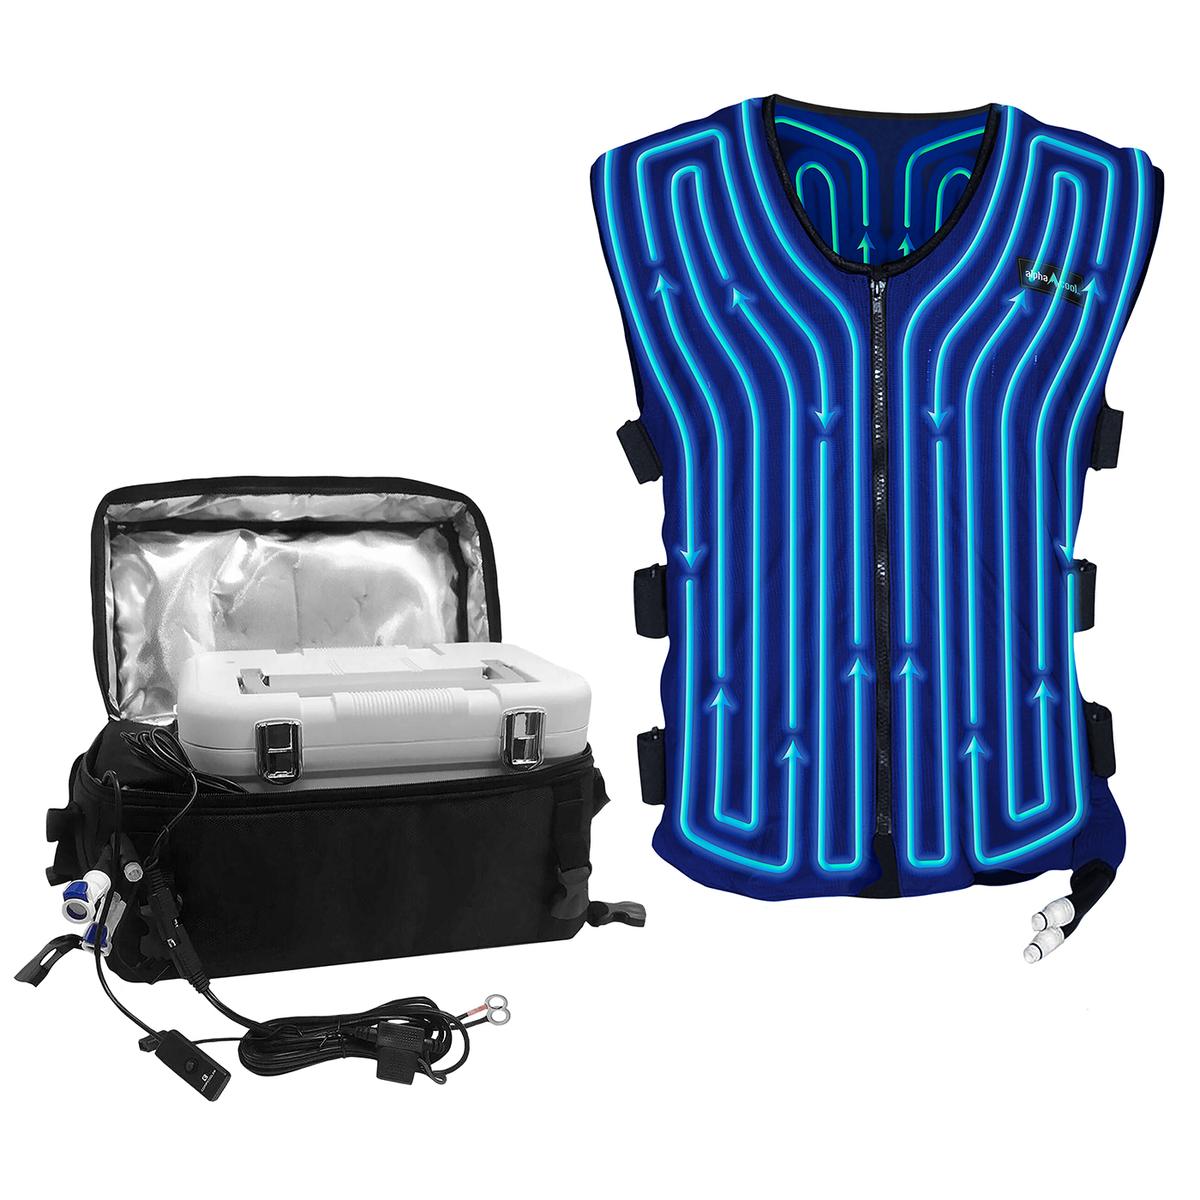 AlphaCool 12V Motorcycle Circulatory Cooling Vest System